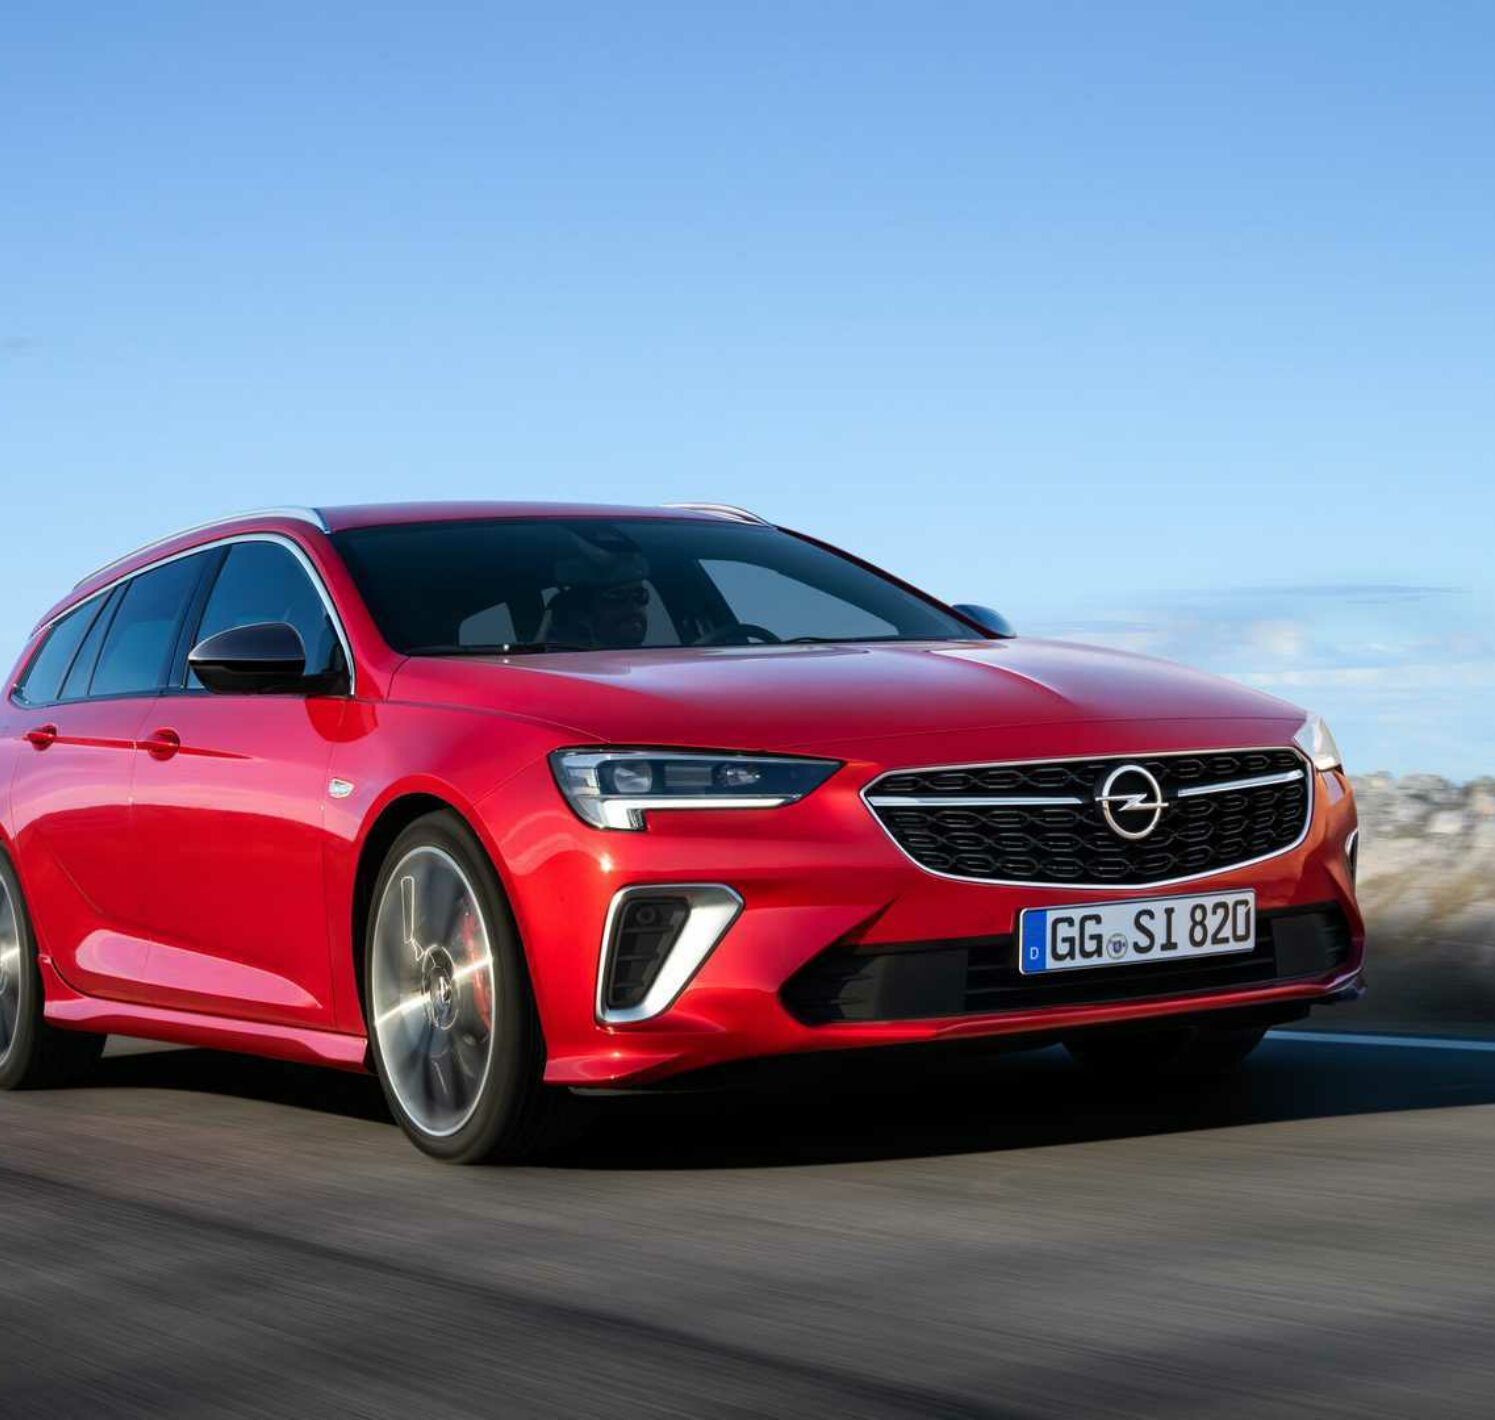 https://autofilter.sk/assets/images/insignia-sports-tourer/gallery/2020-opel-insignia-gsi-facelift.jpeg - obrazok